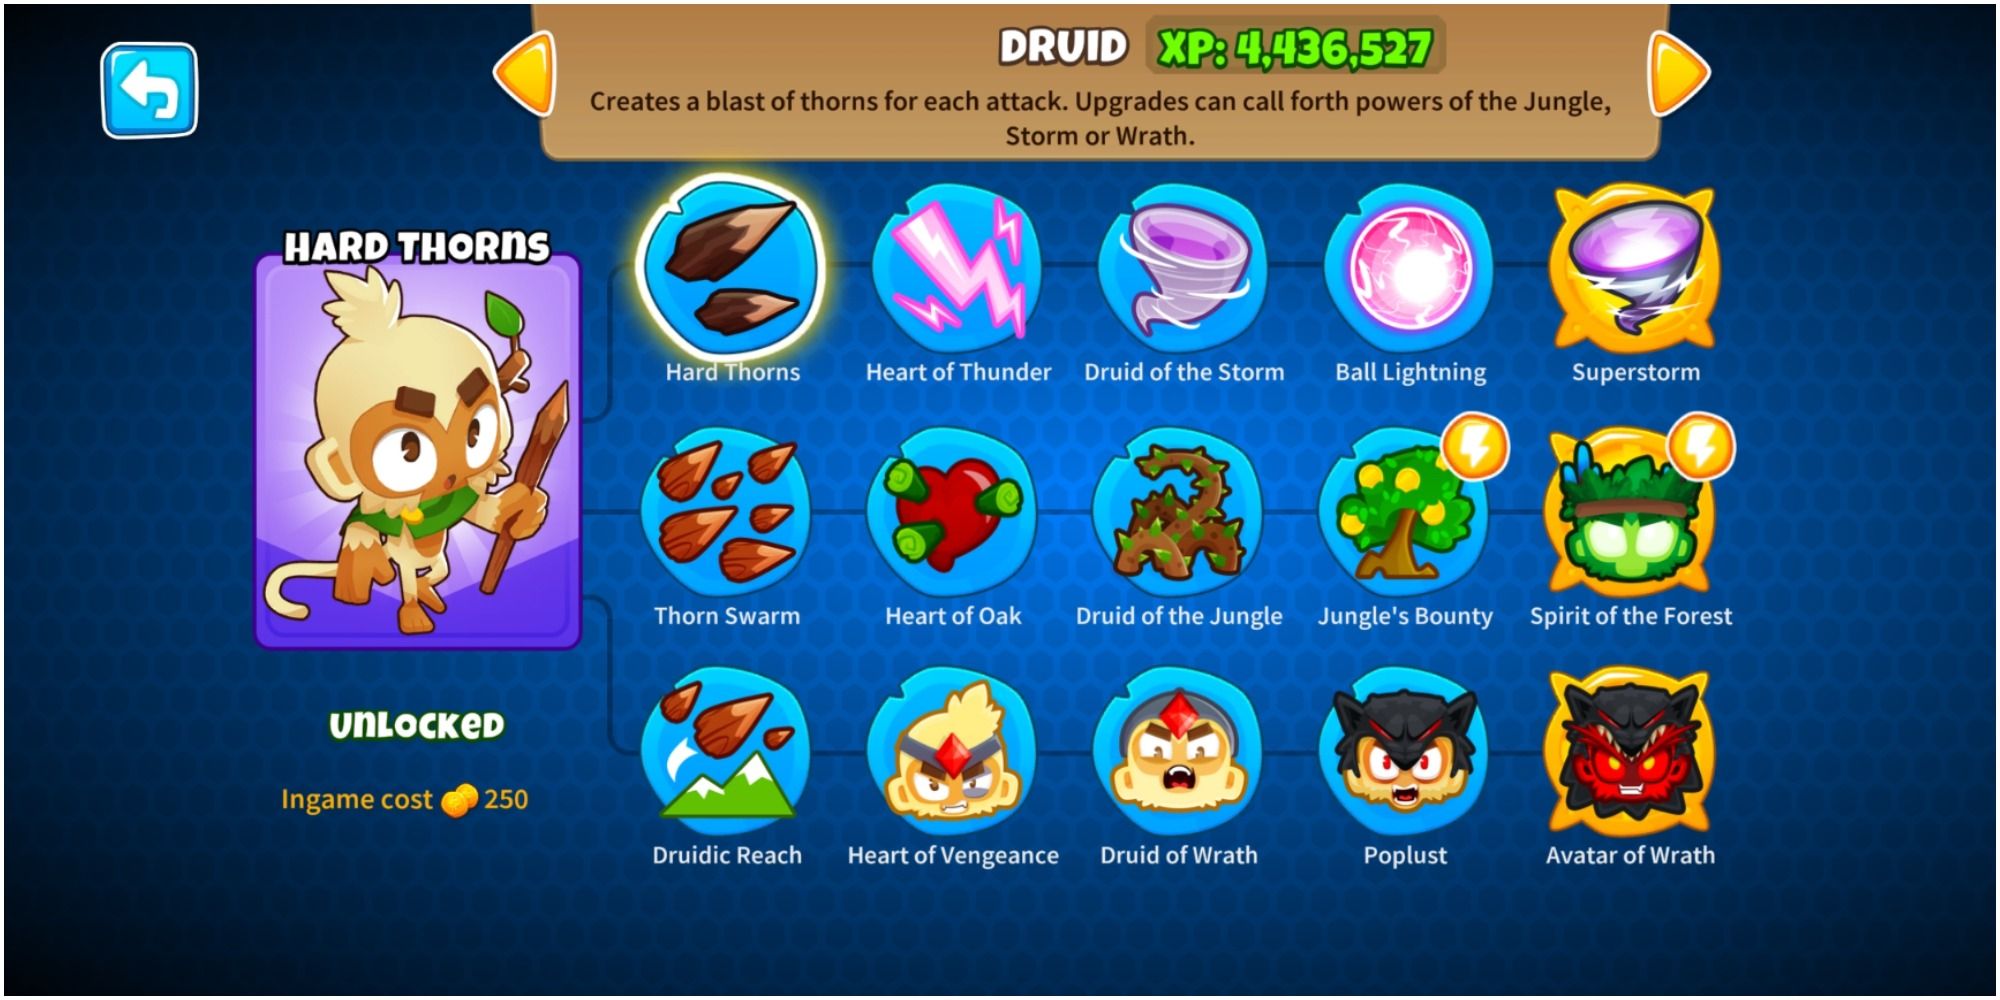 Bloons TD 6 Druid Upgrade Trees